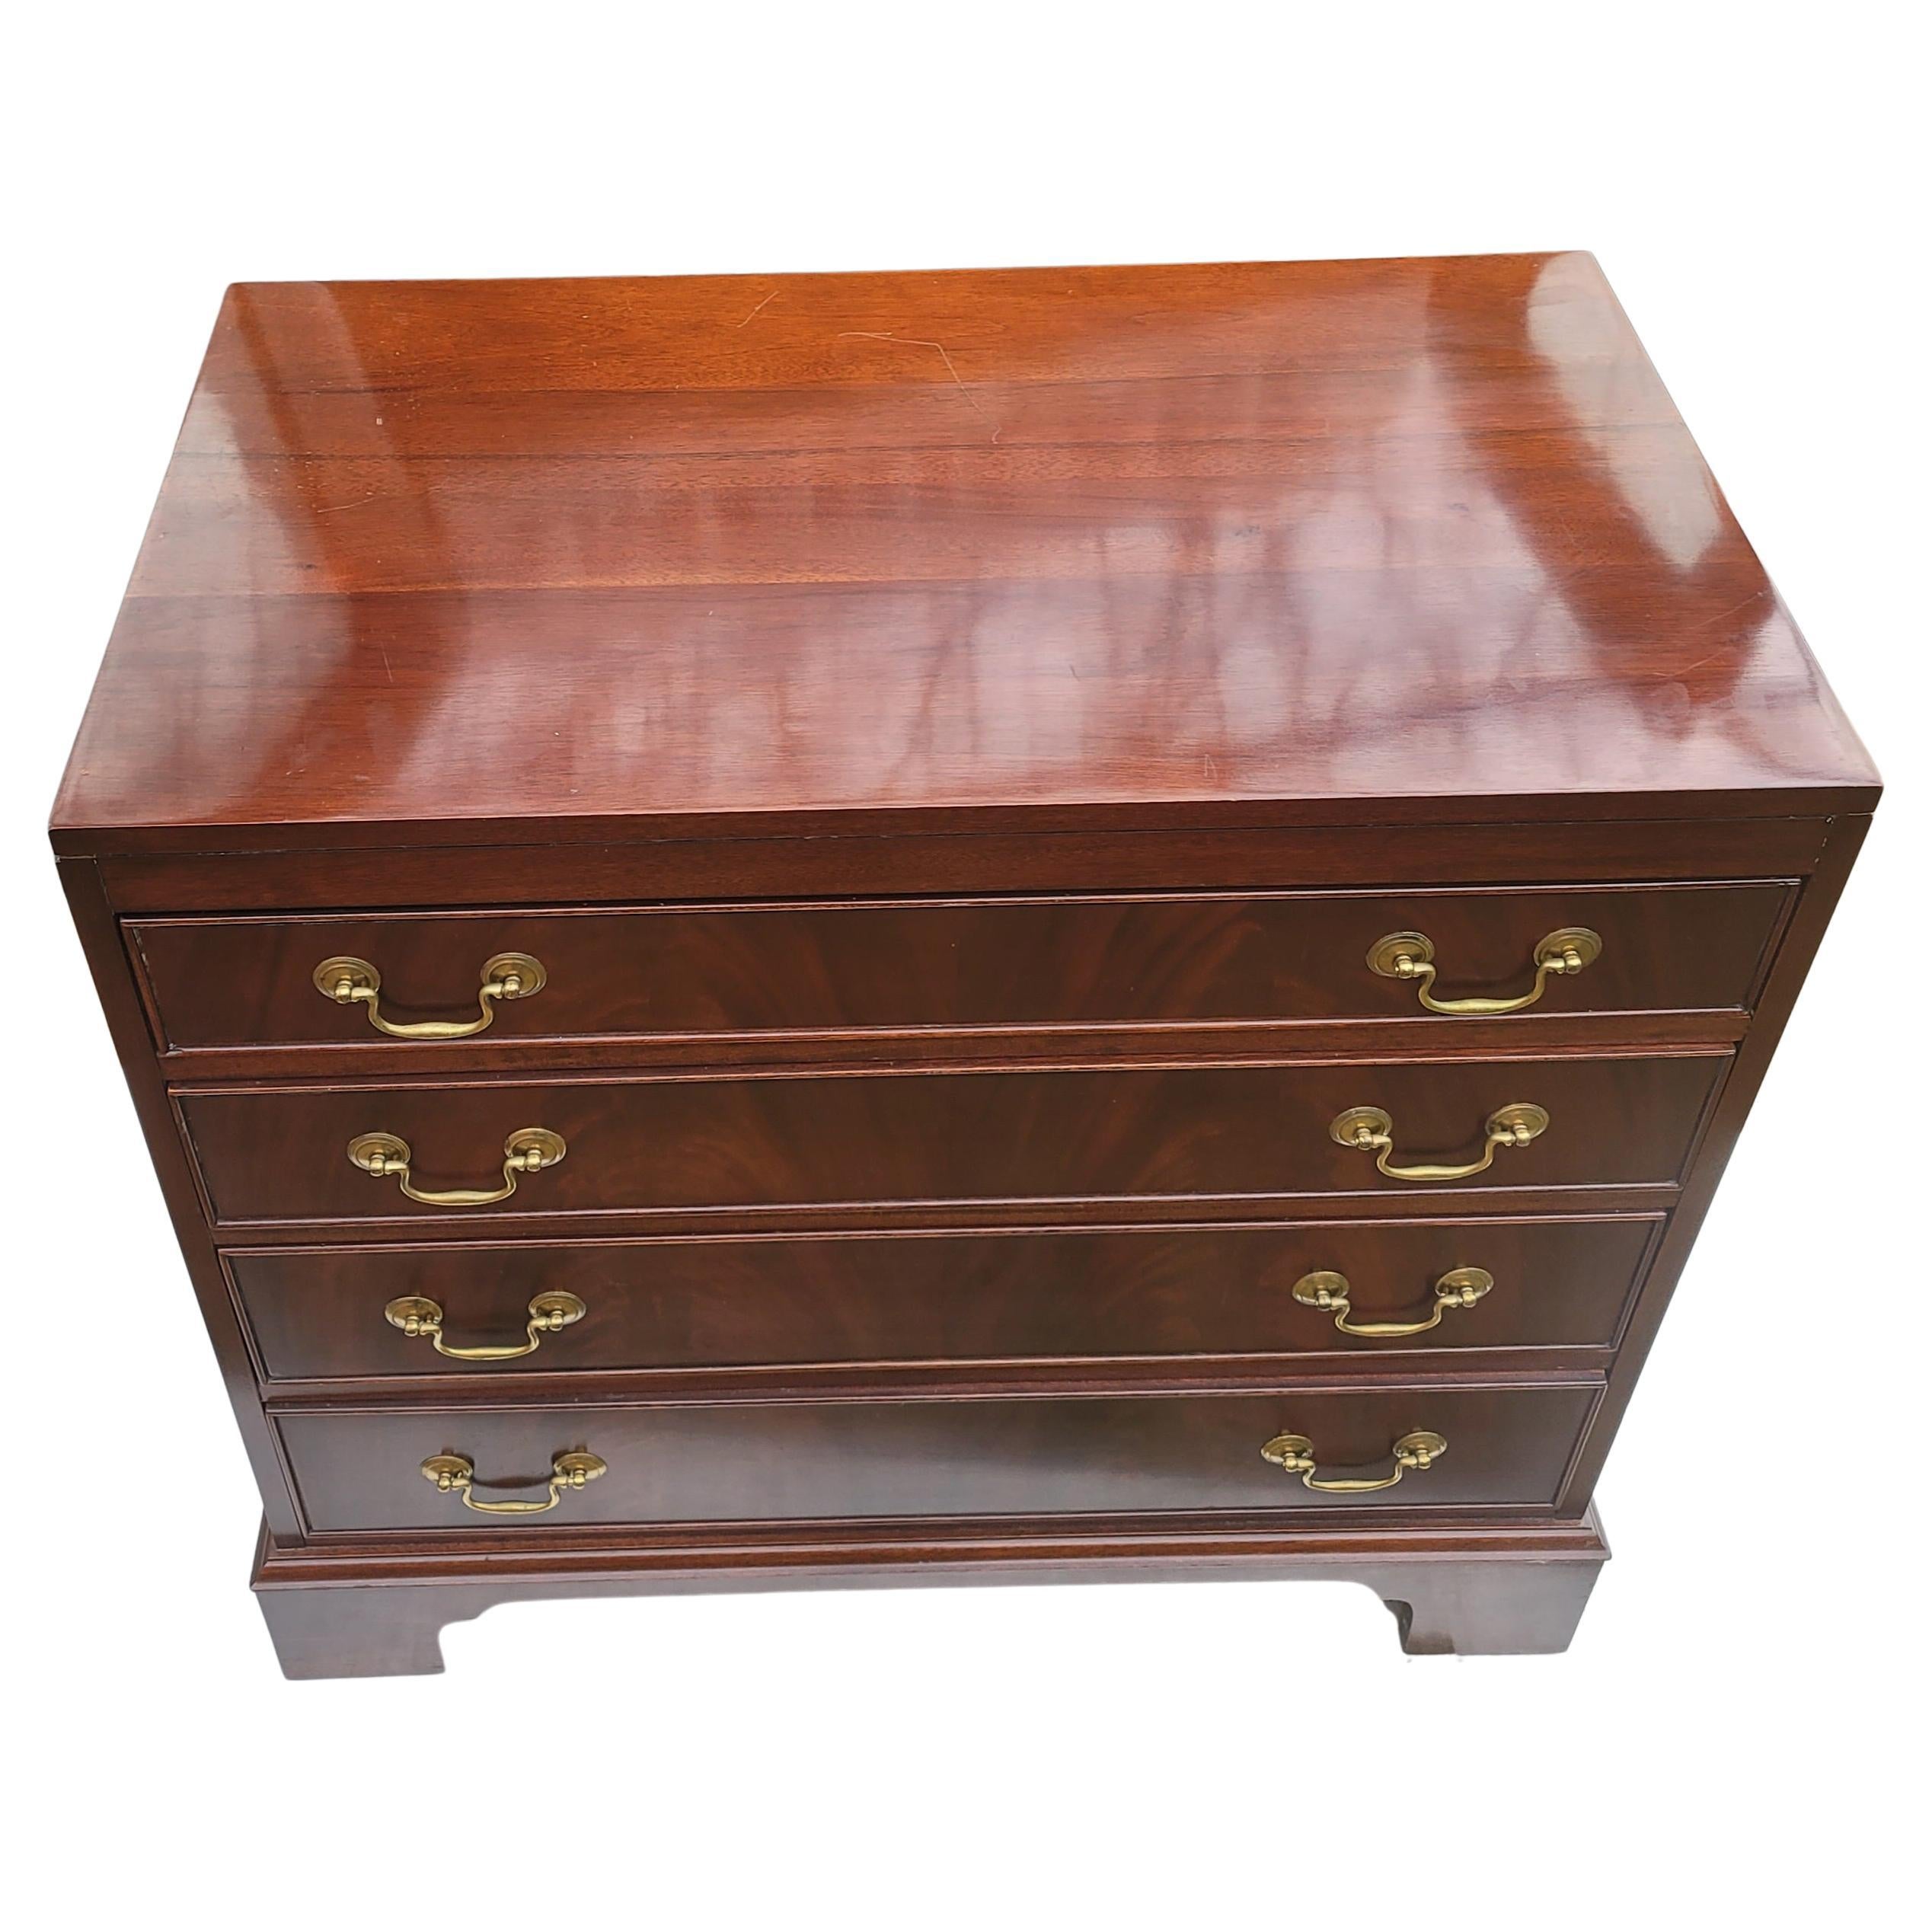 A Jasper cabinet Chippendale flame mahogany commode chest of drawers, beautifully finished with clean and perfectly functioning 4 drawers with dovetail joints.
Wood backing. Very good vintage condition.